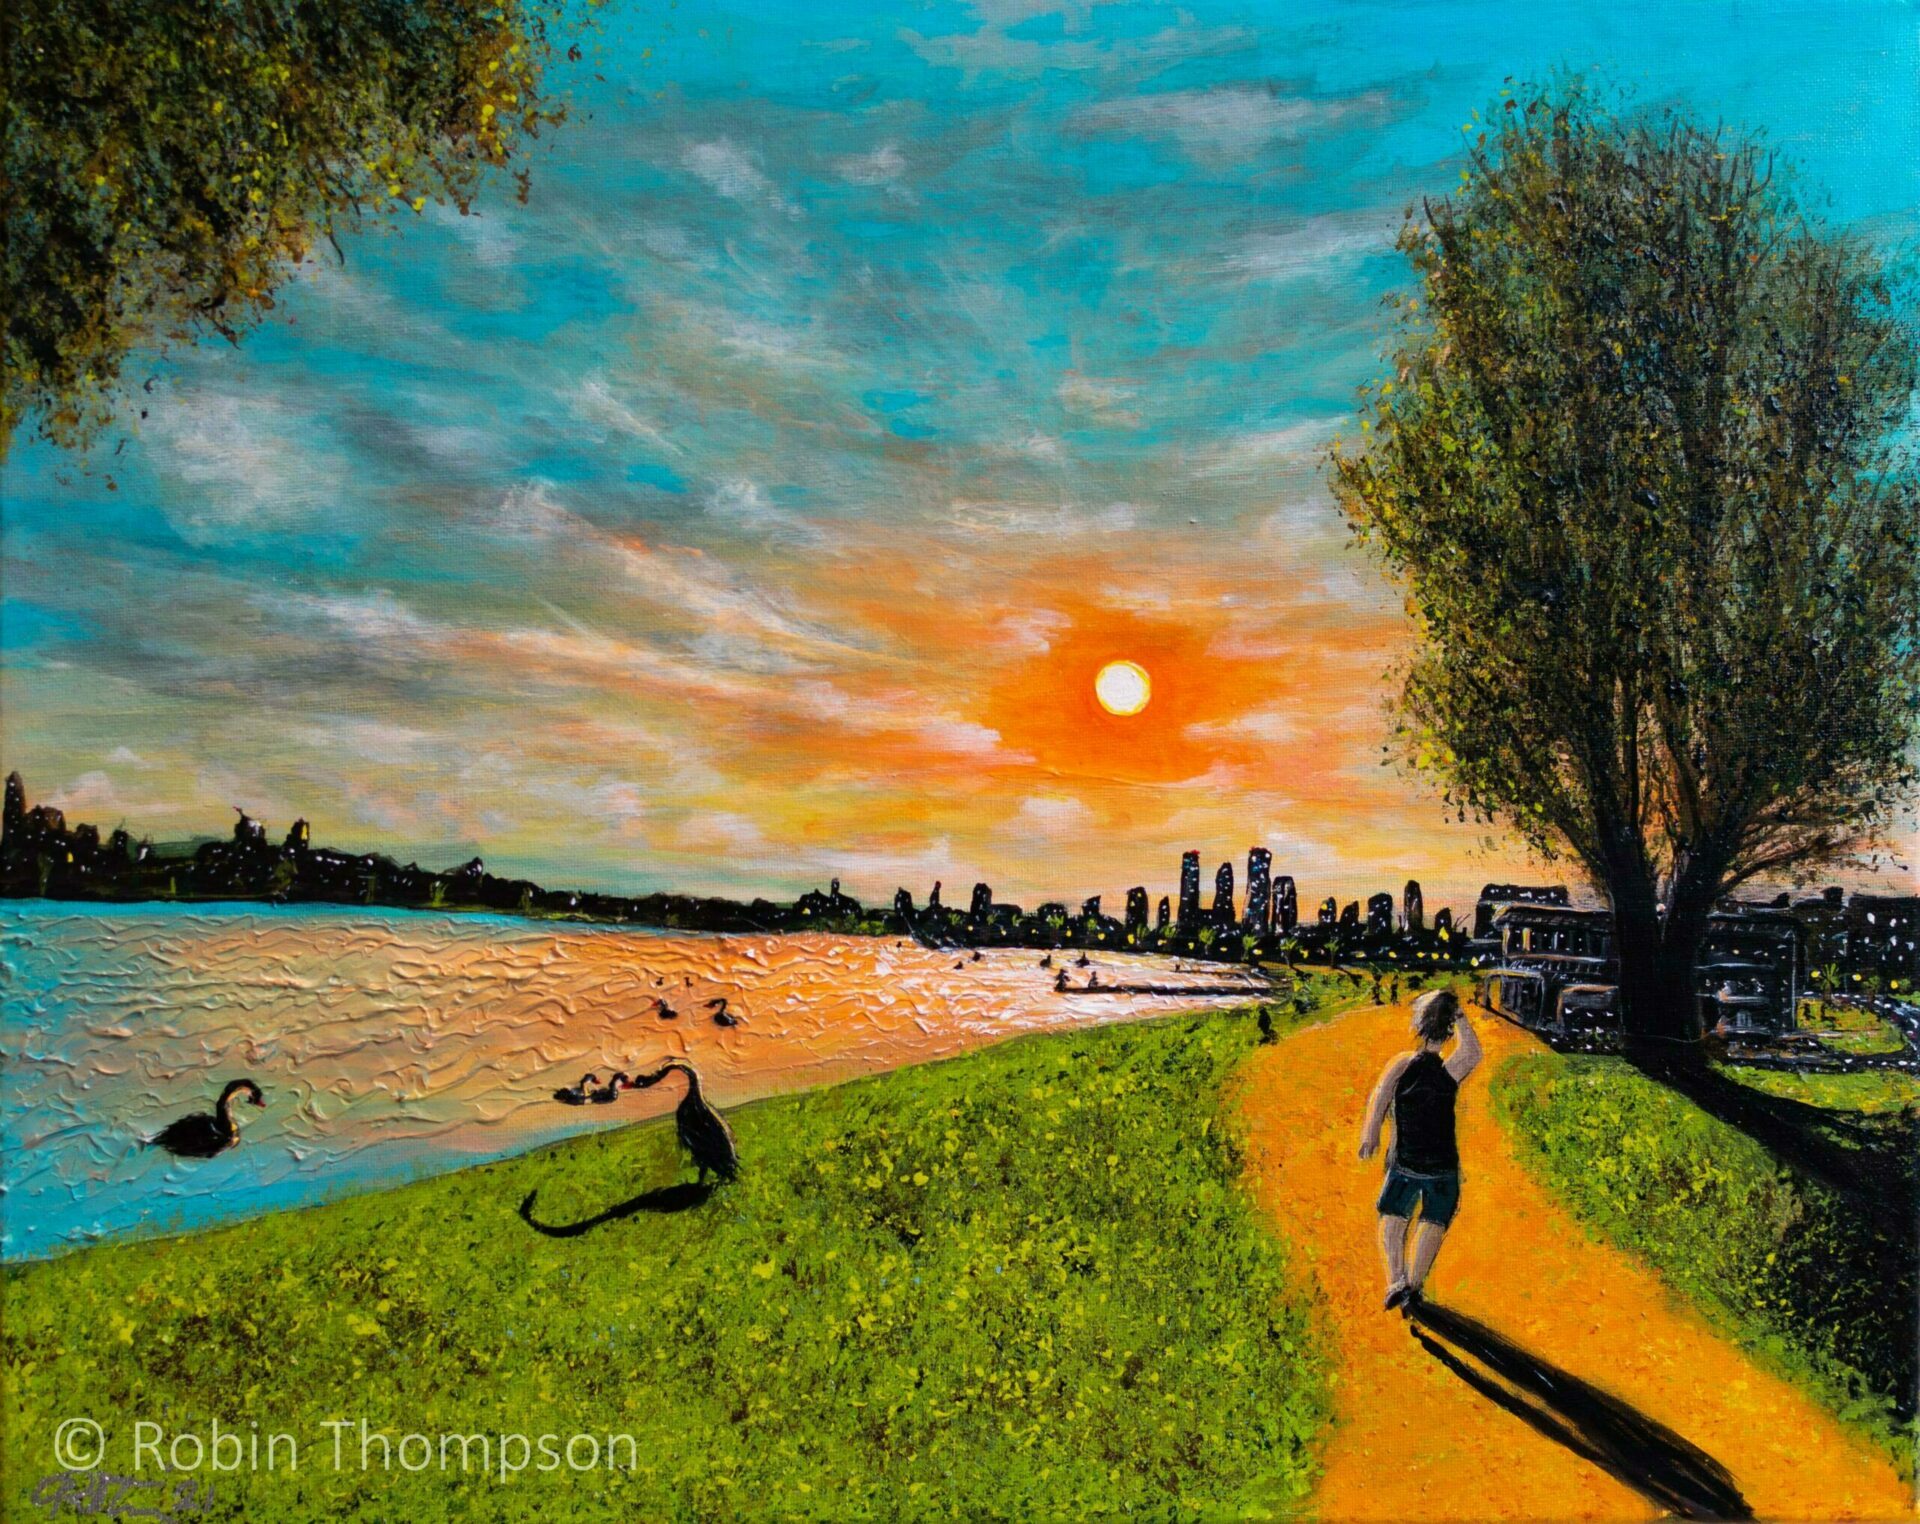 Acrylic painting of a sunset over Albert Park lake in Melbourne/Naarm, showing a city silhouette and swan familes, and a human looking towards the sunset.